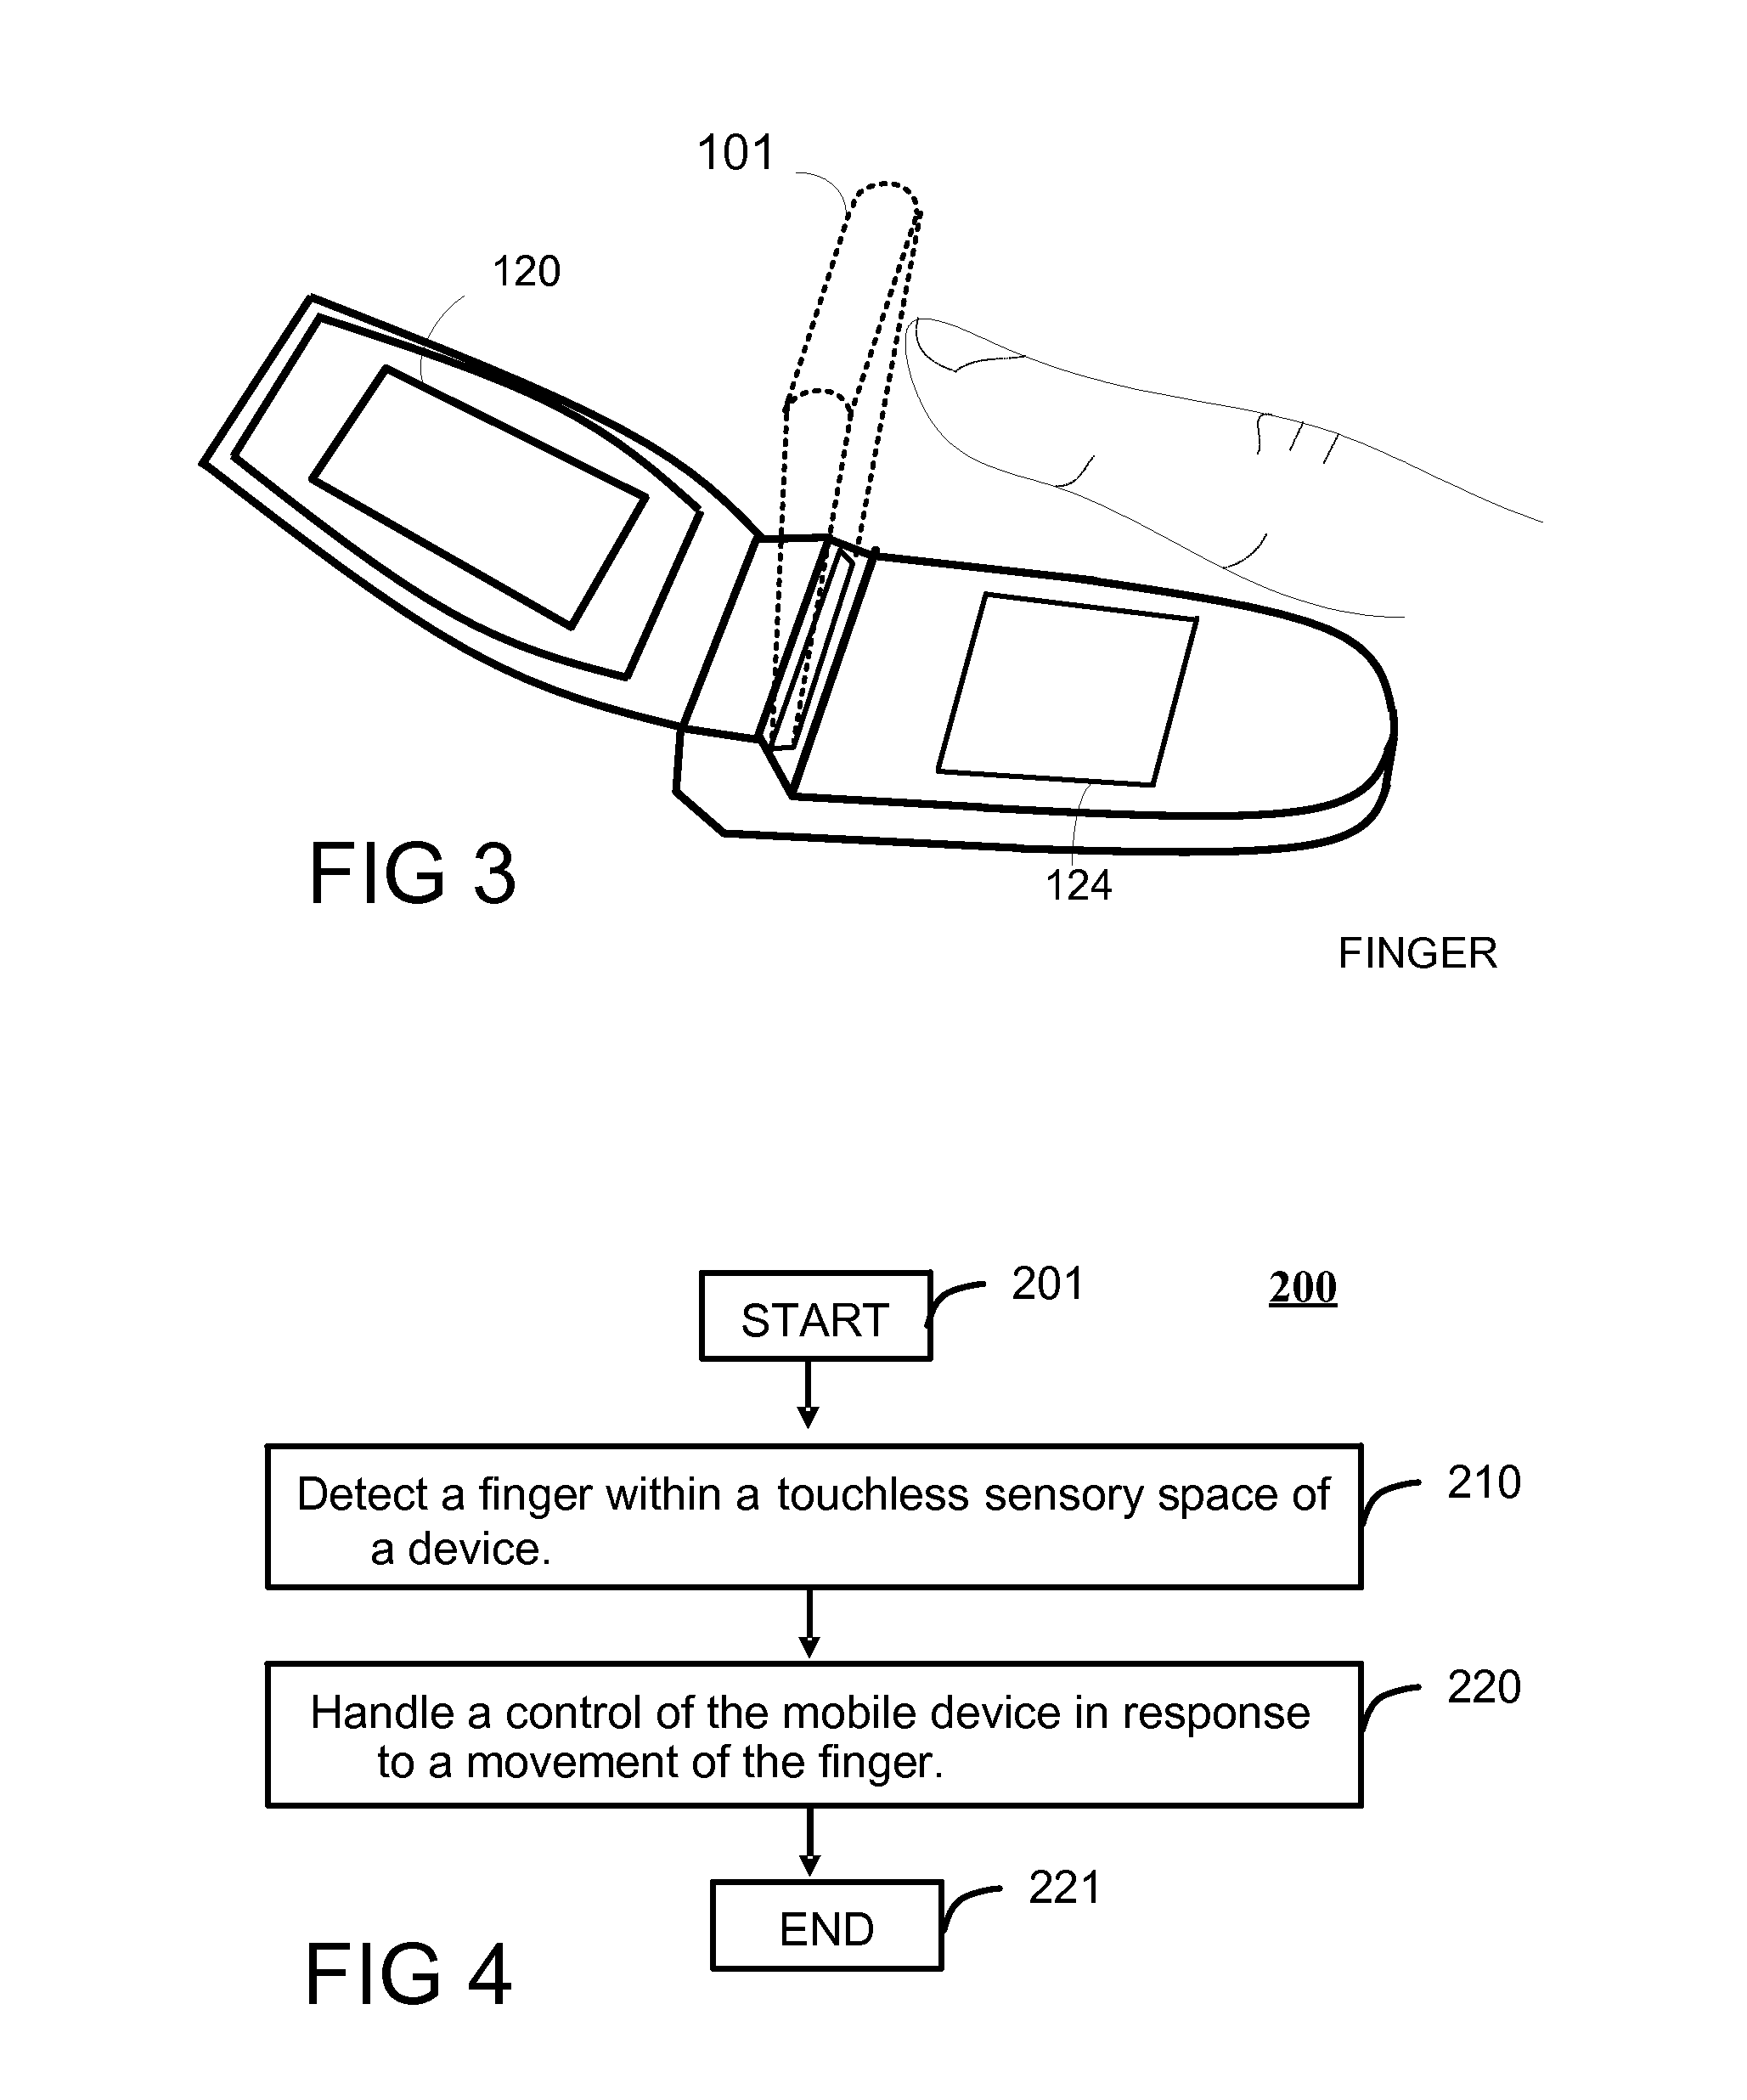 Method and Apparatus for Touchless Control of a Device